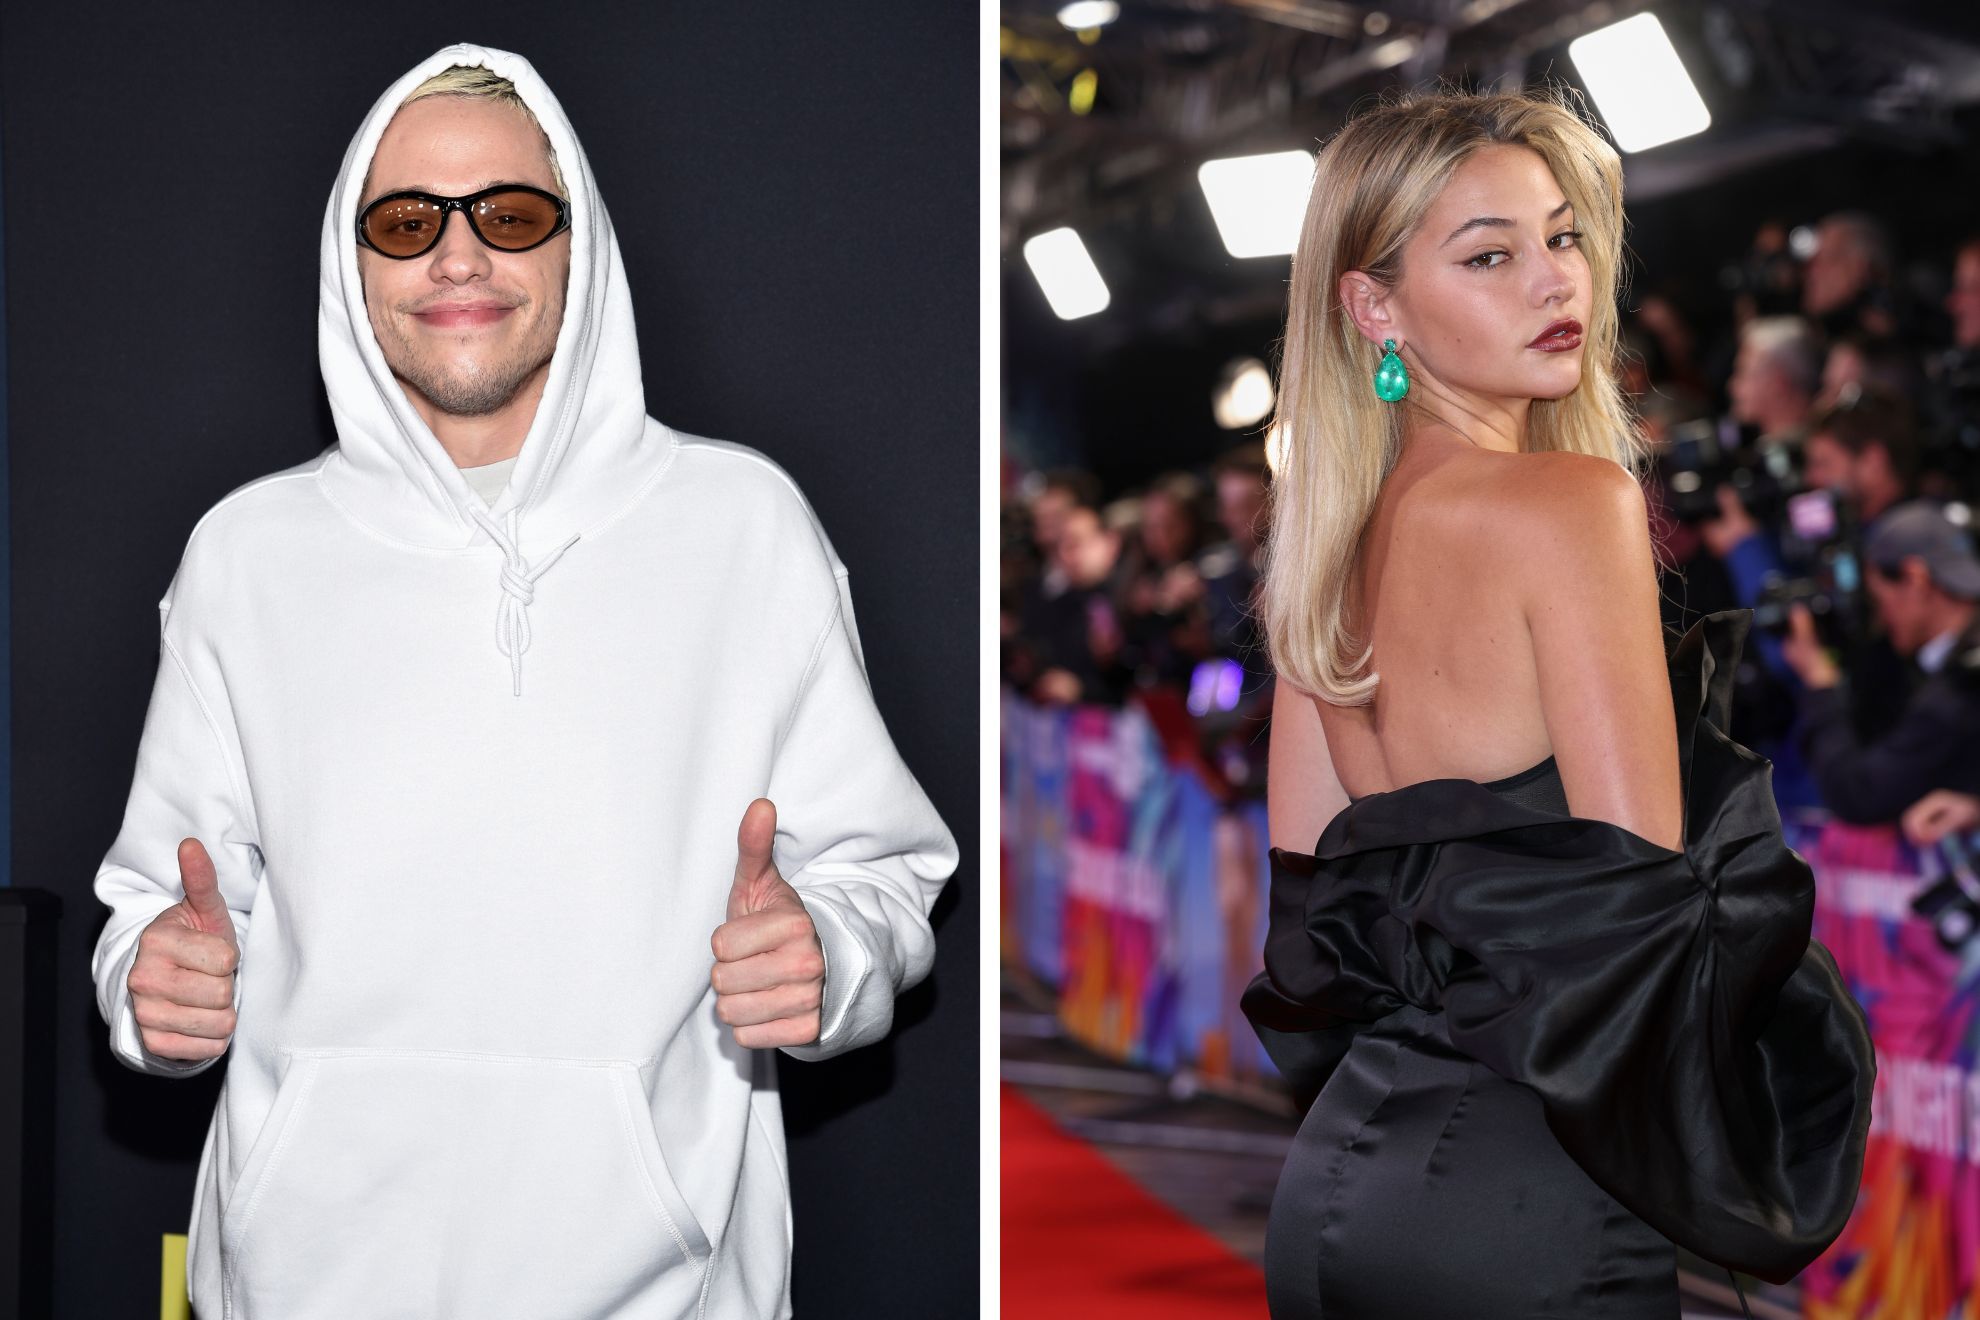 Pete Davidson lands yet another stunning GF: who is Madelyn Cline?